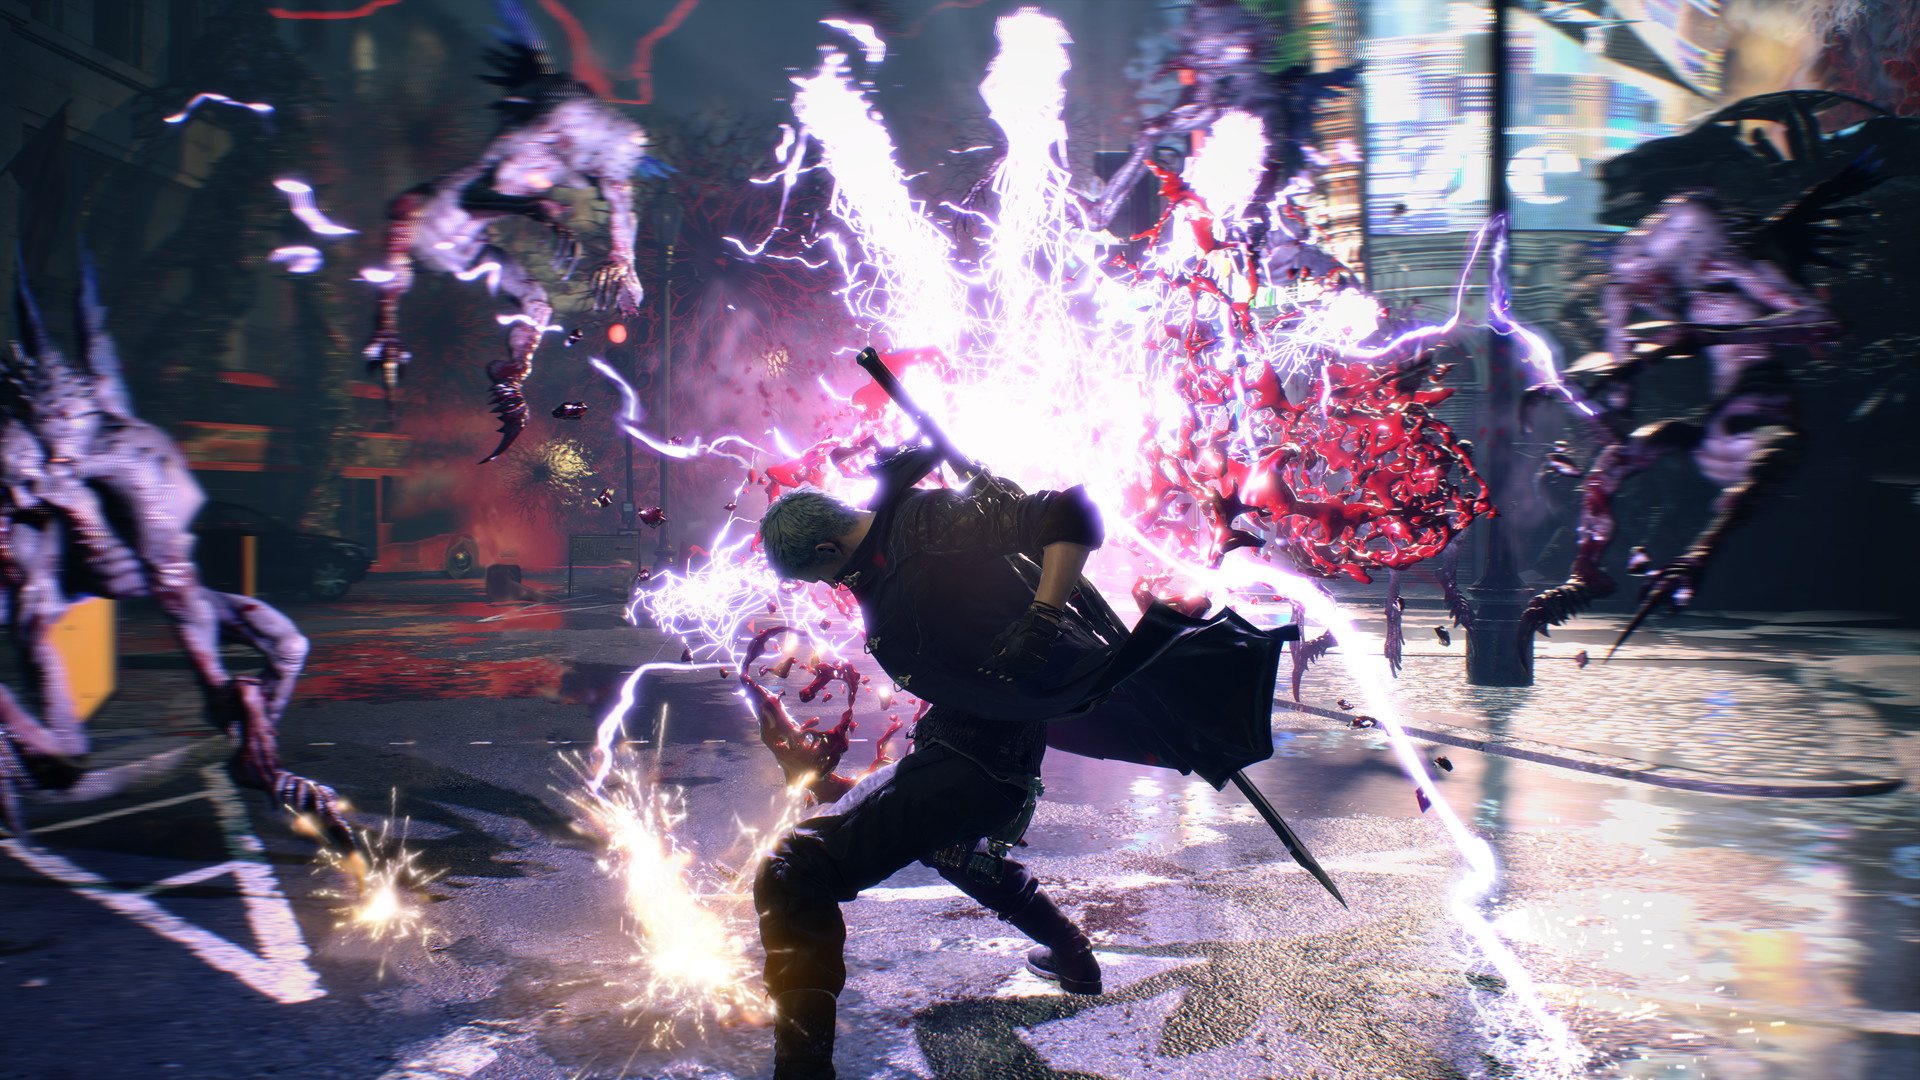 Devil May Cry 5 PlayStation 4 Account pixelpuffin.net Activation Link $13.55